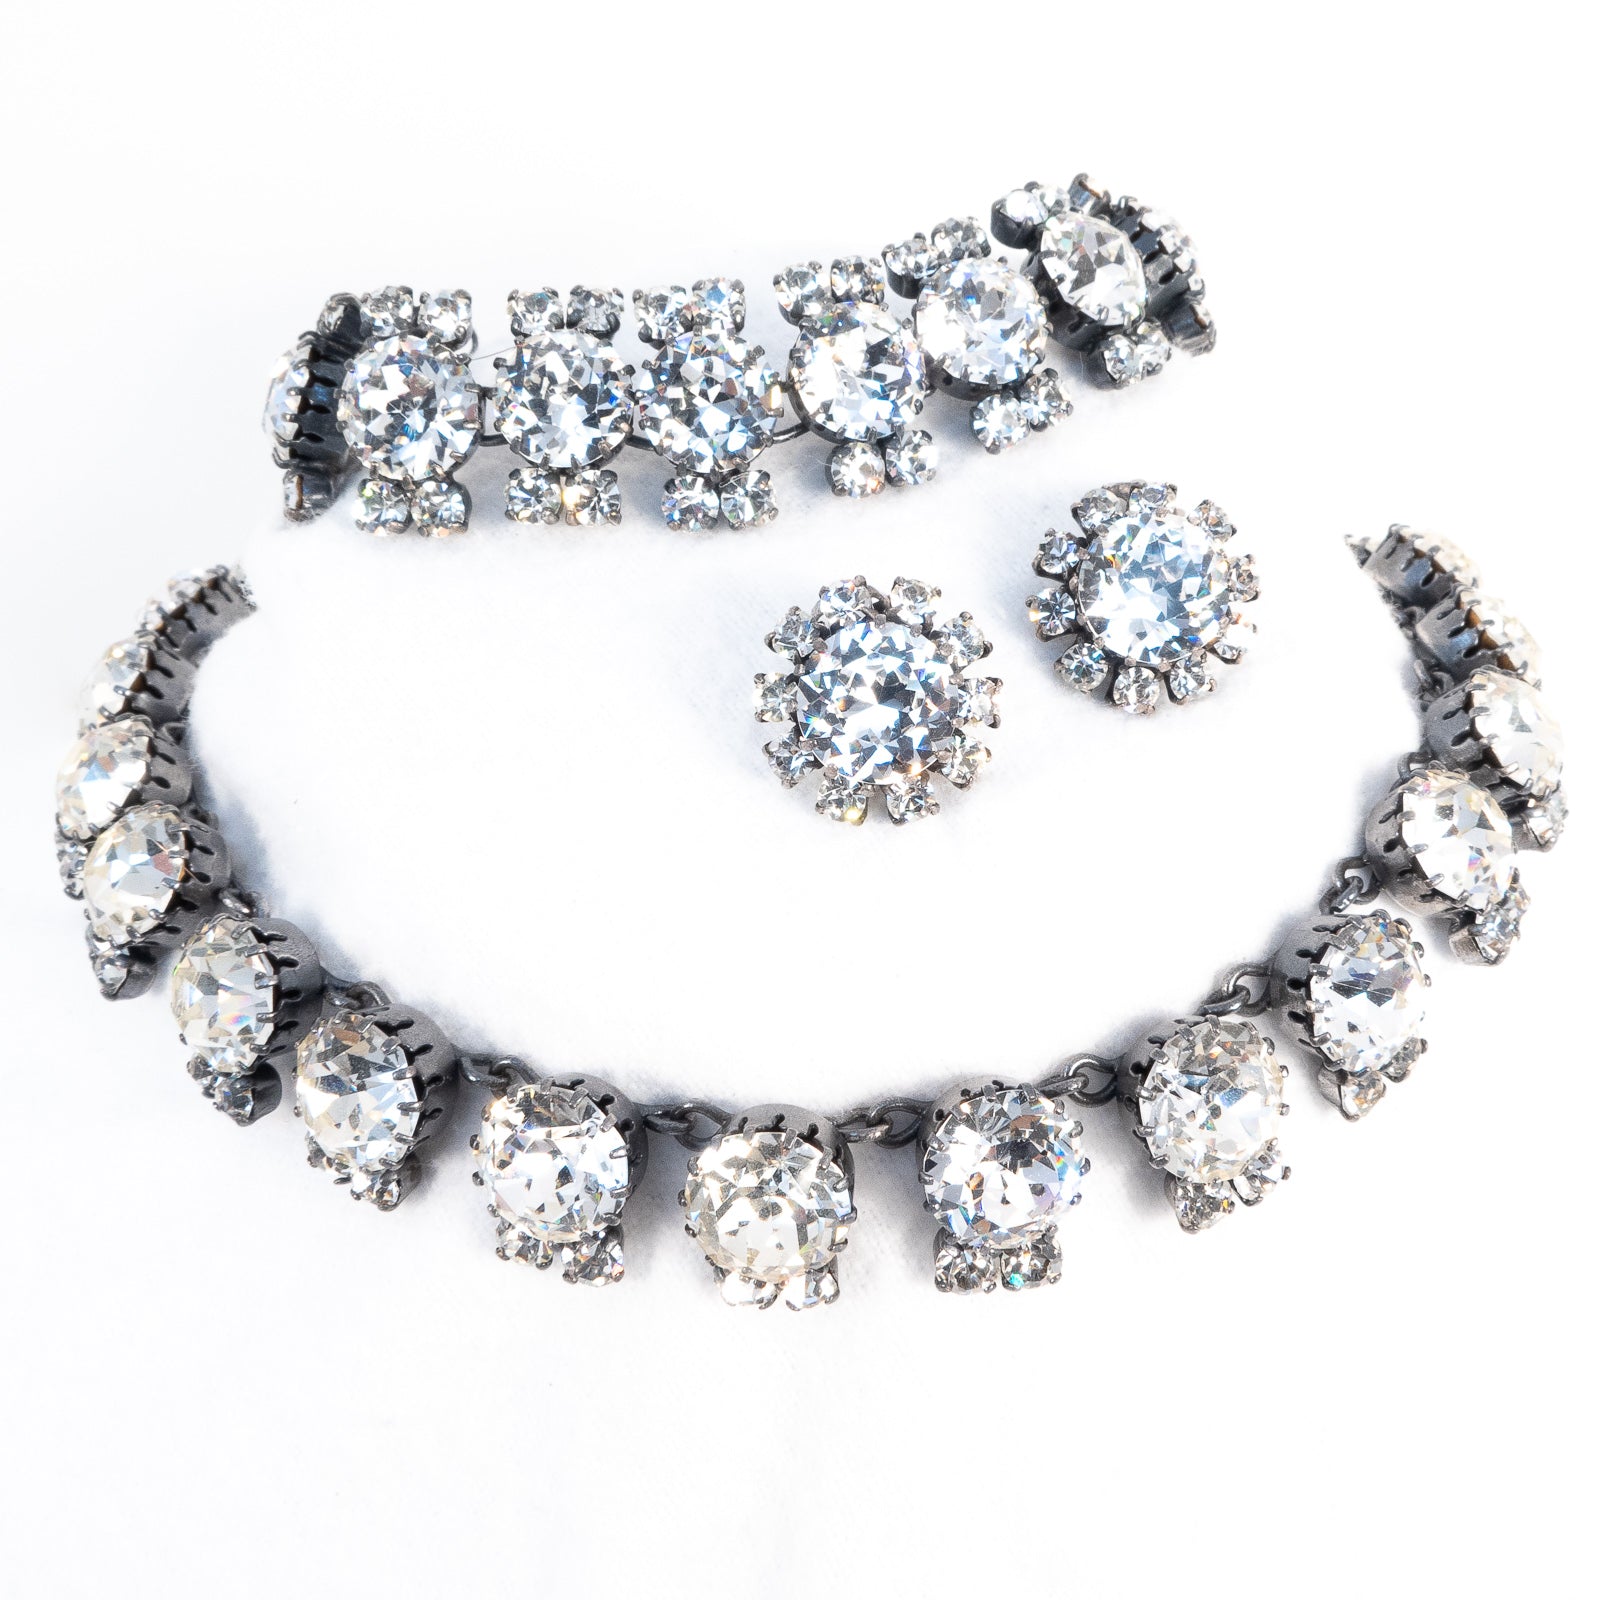 Top more than 237 rhinestone necklace and earring set